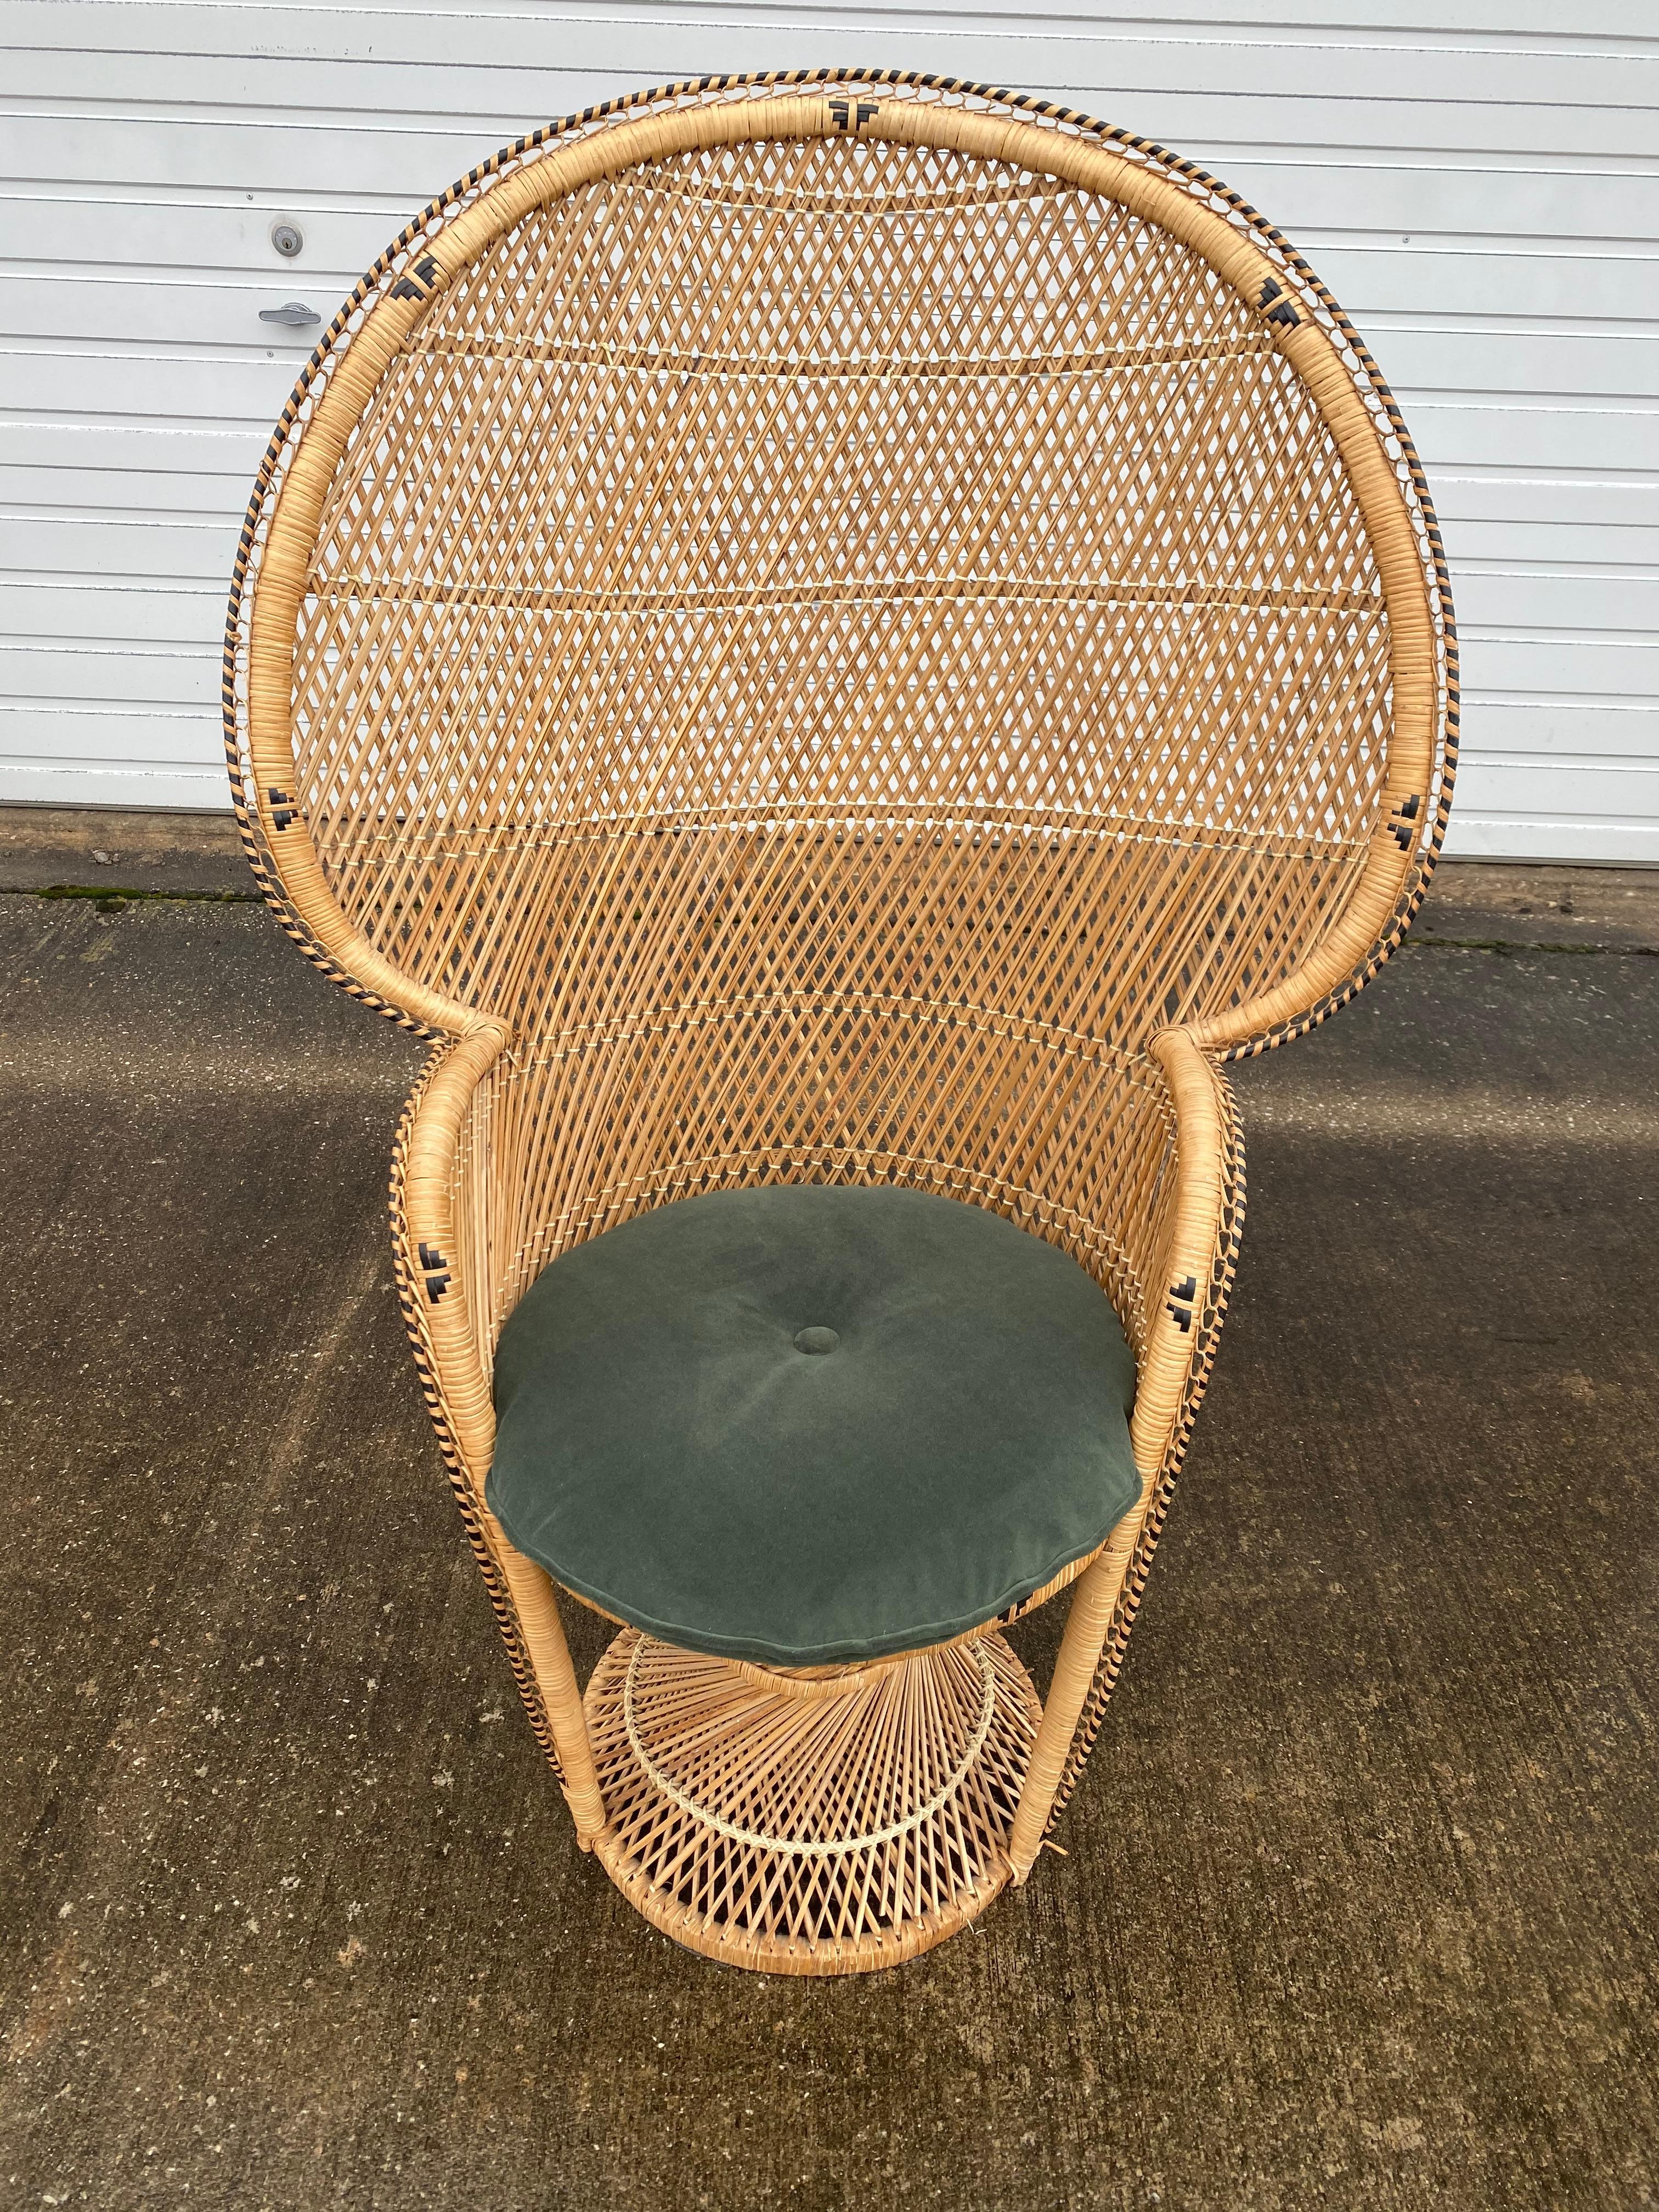 Vintage Boho Chic Beige & Black Wicker Peacock Chair with New Cushion 5